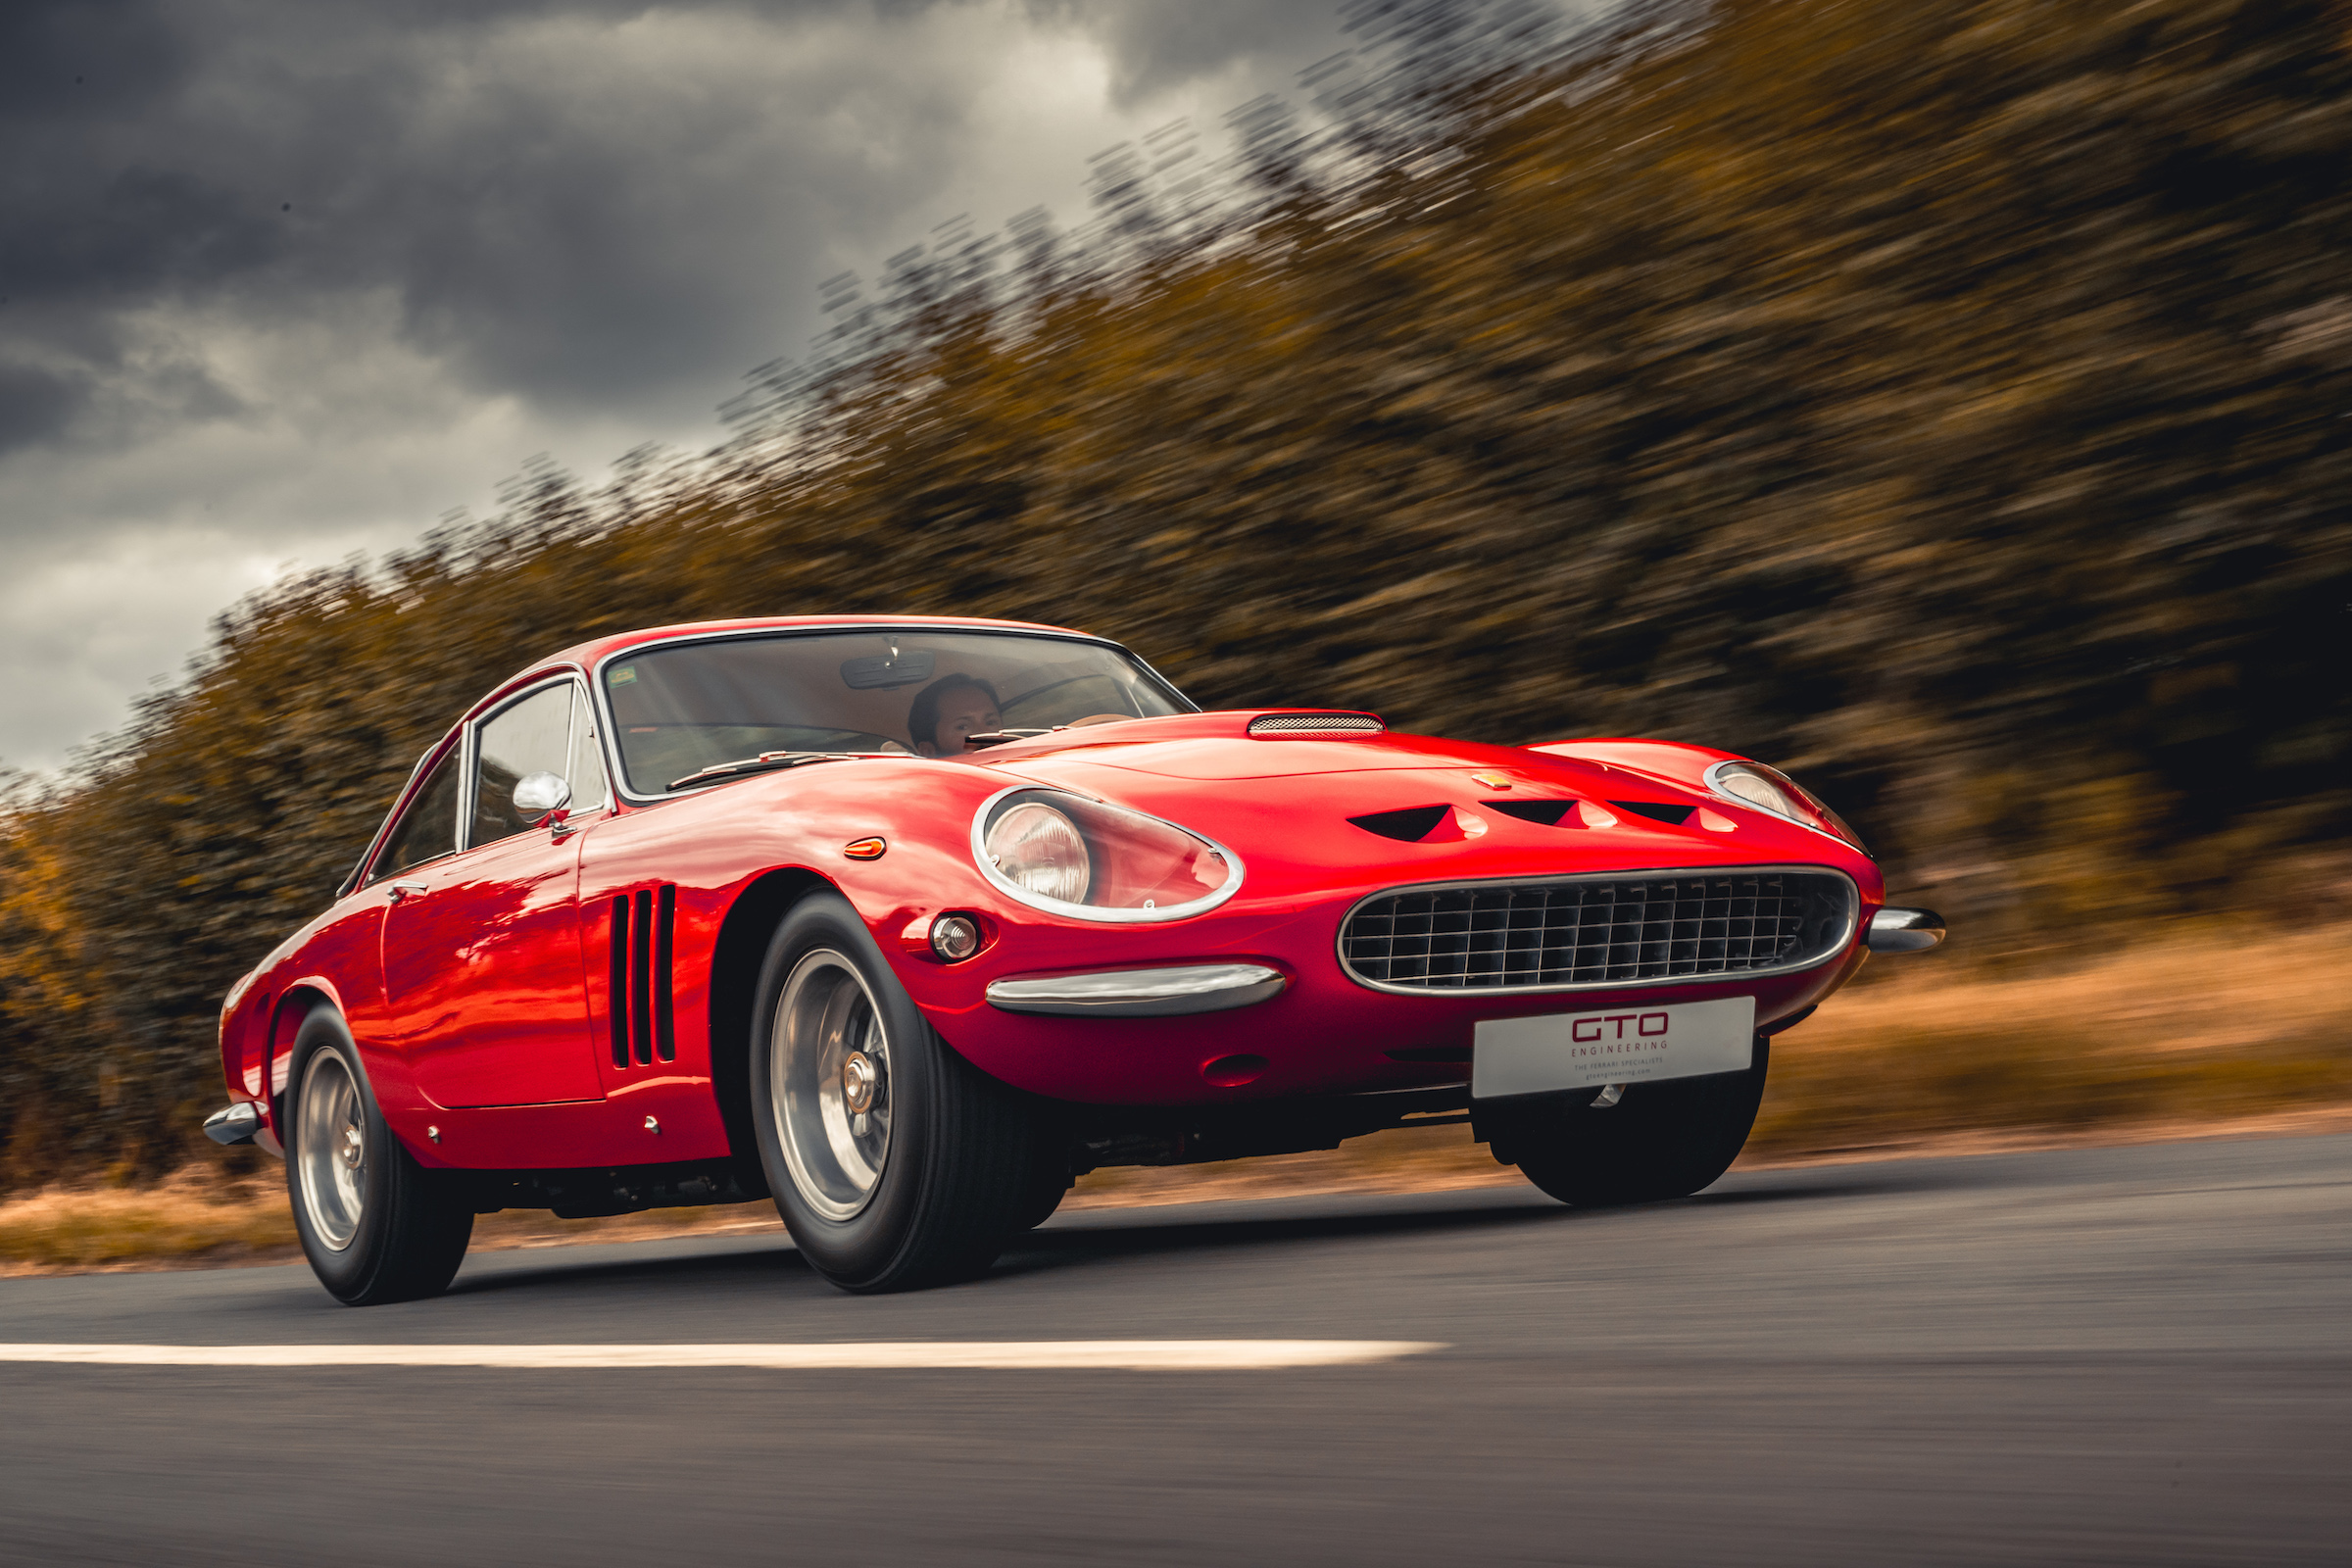 Once in a lifetime: What would you pay for this one-off Ferrari 250?